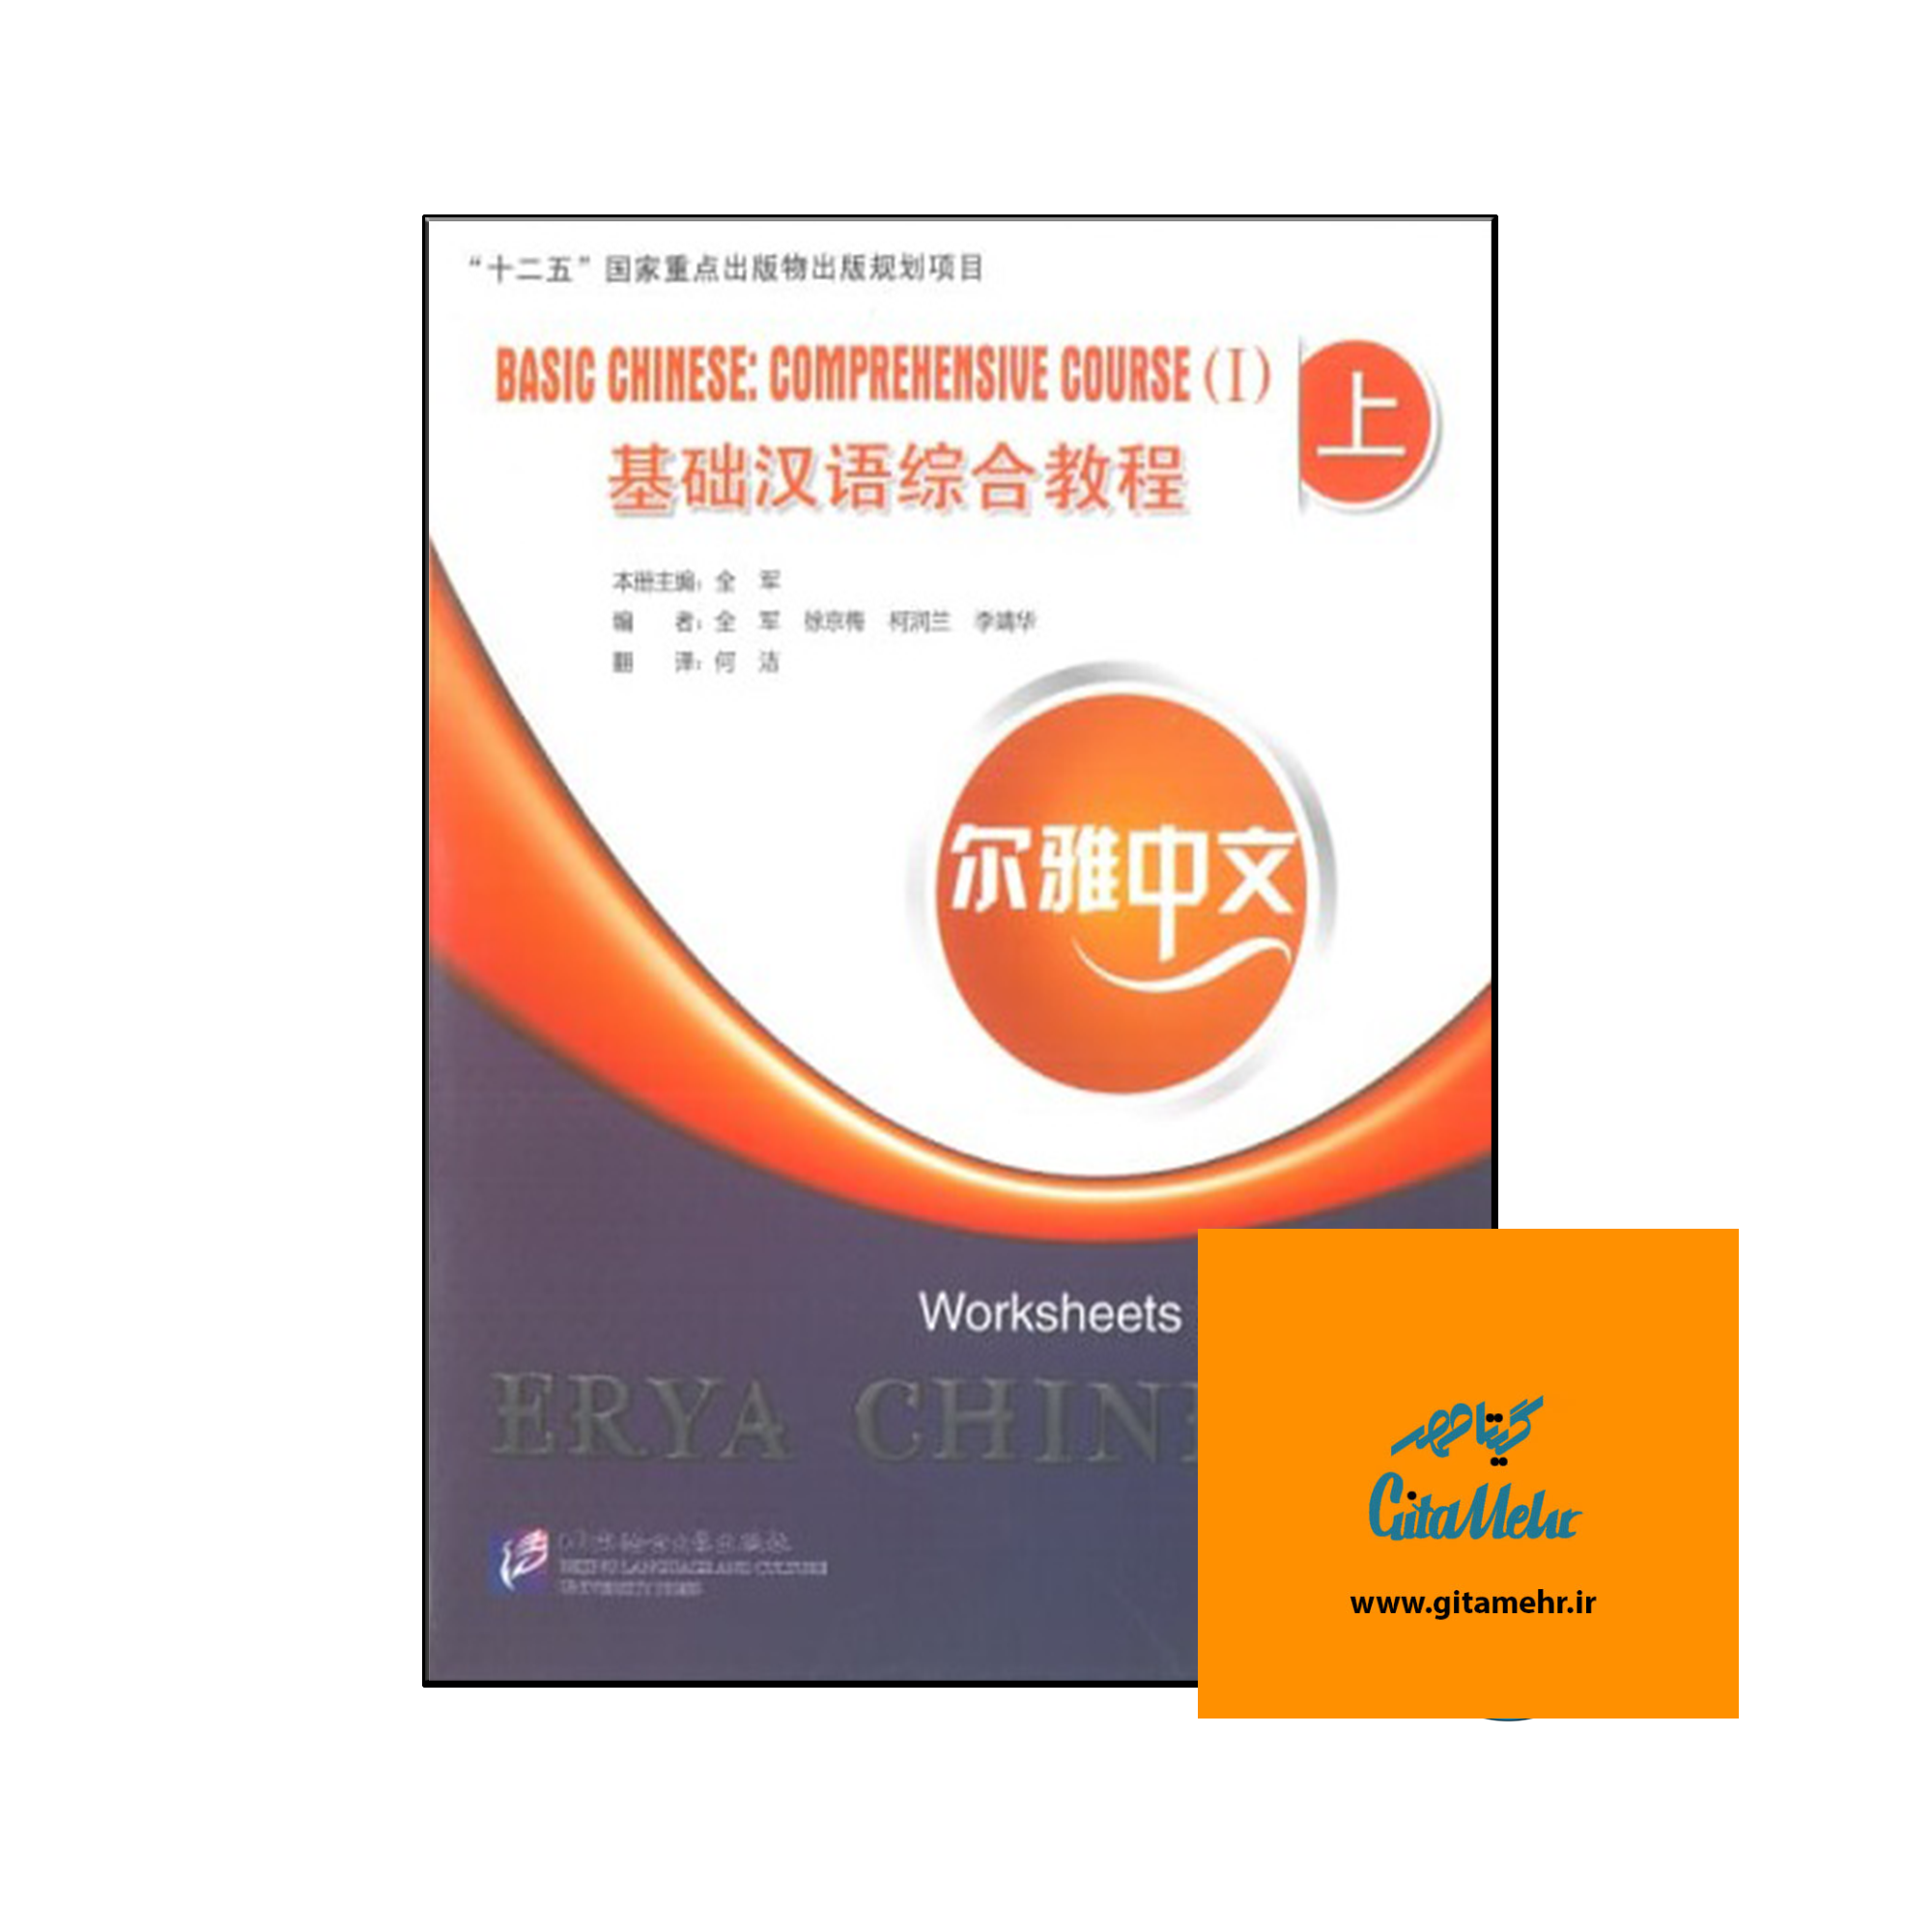 daa9d8aad8a7d8a8 basic chinese comprehensive course 1 worksheets 65ecb59142c3e